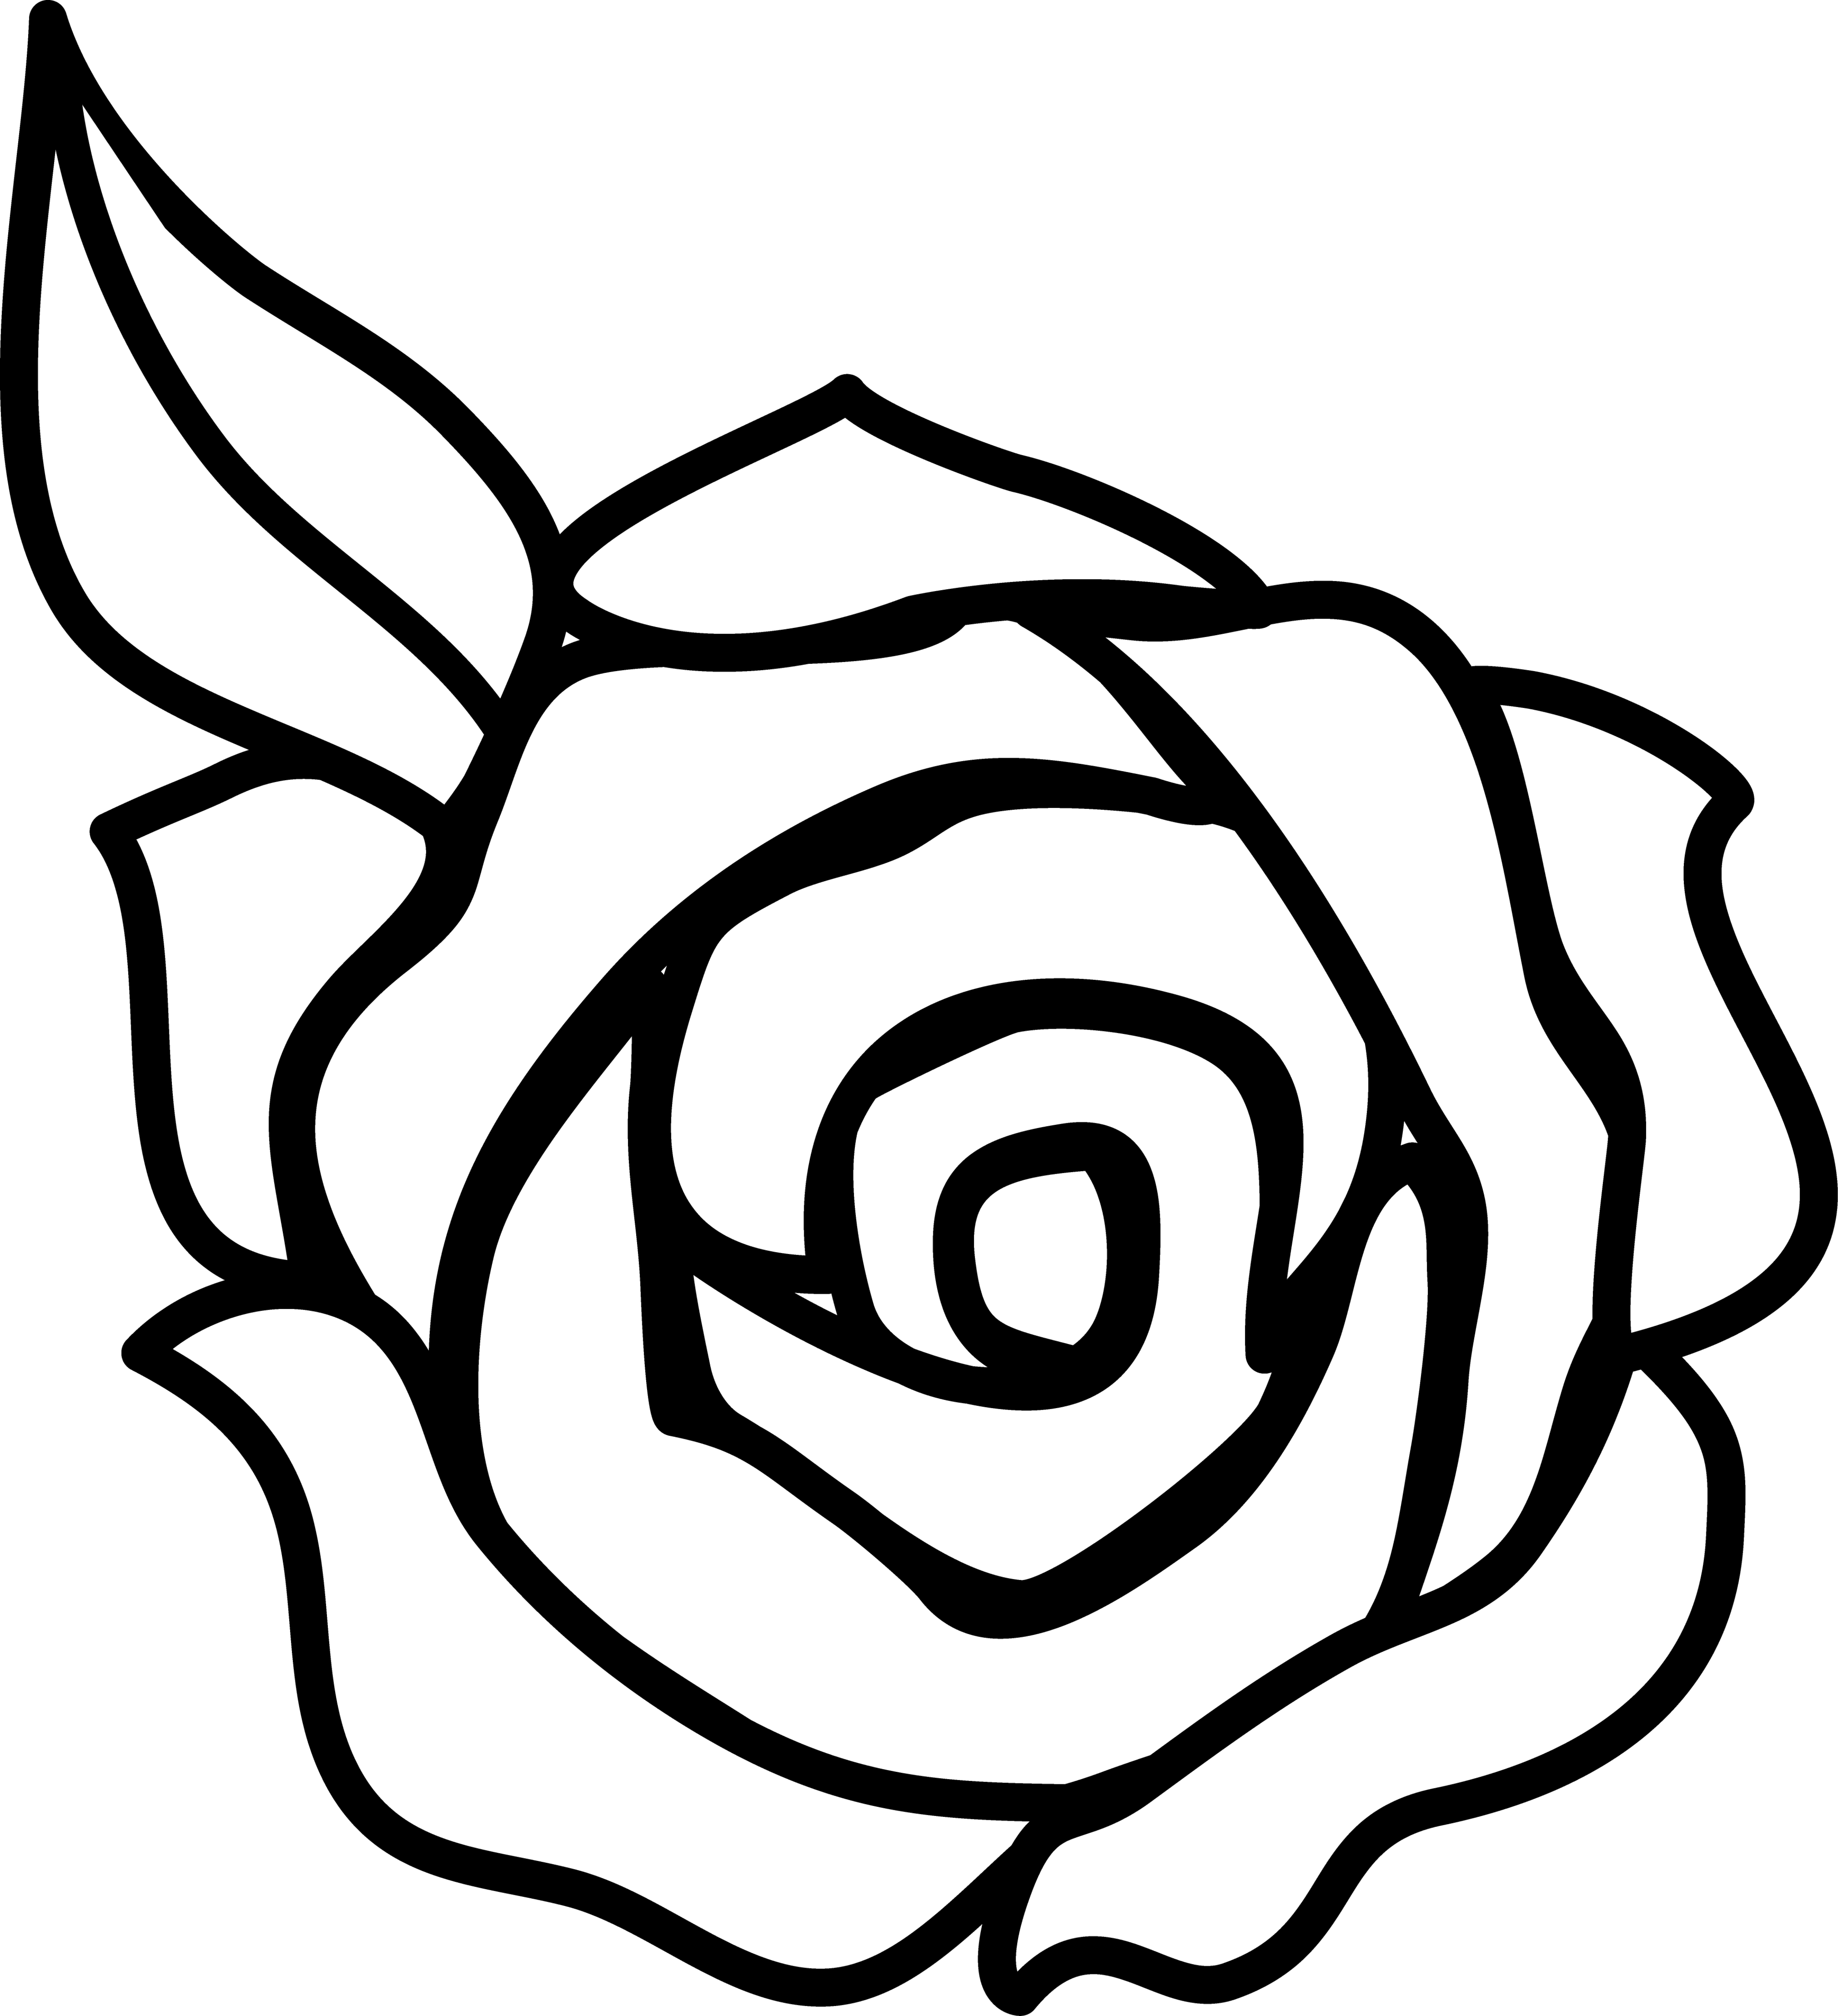 Rose clipart simple